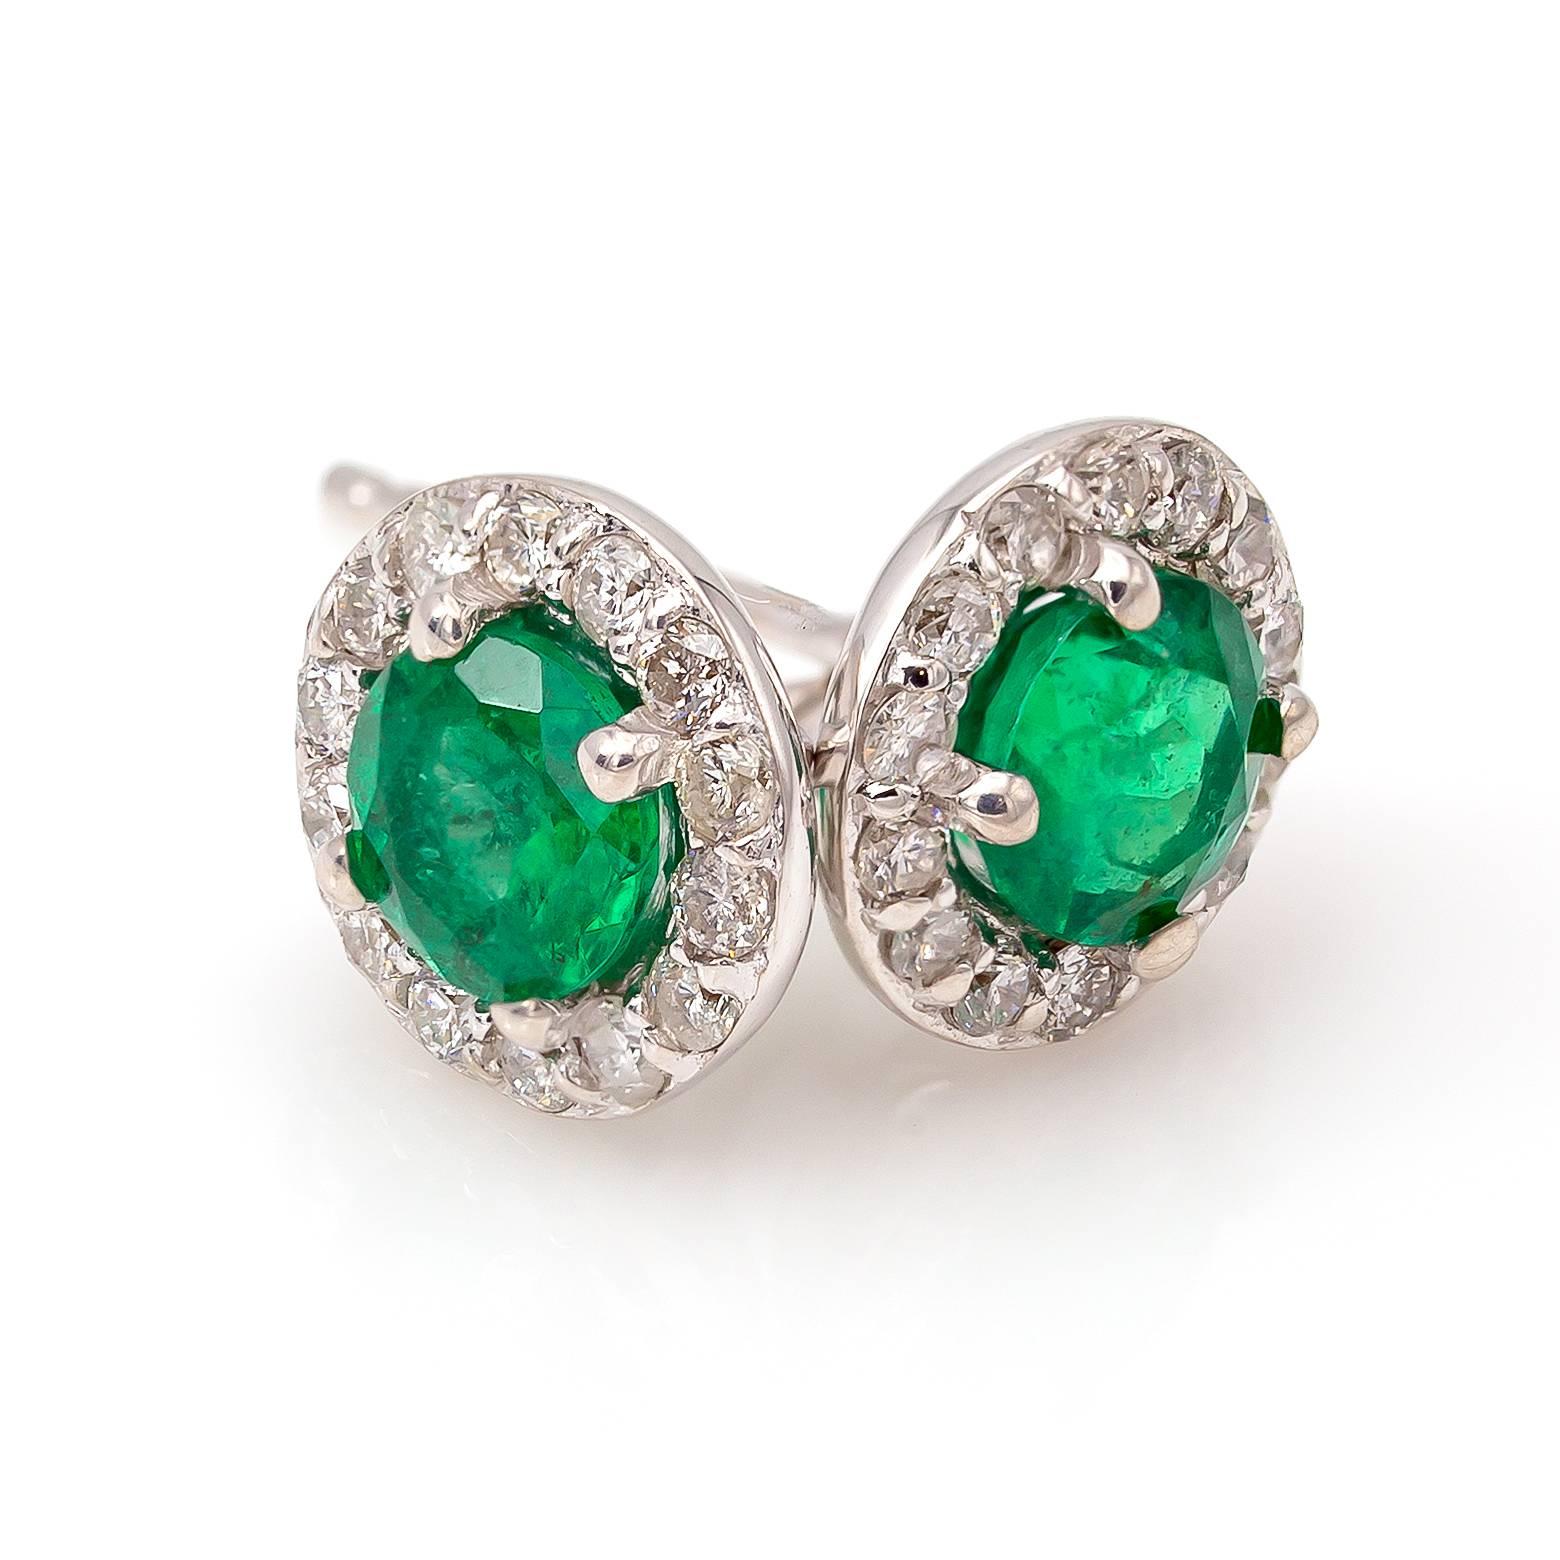 Bright sea green emeralds surrounded with a diamond halo bring an elegant twist to a classic look. A yummy soft green in the most sophisticated of fashion. These beauties equal 0.88 carats in the total weight of both emeralds and 0.26 carats of